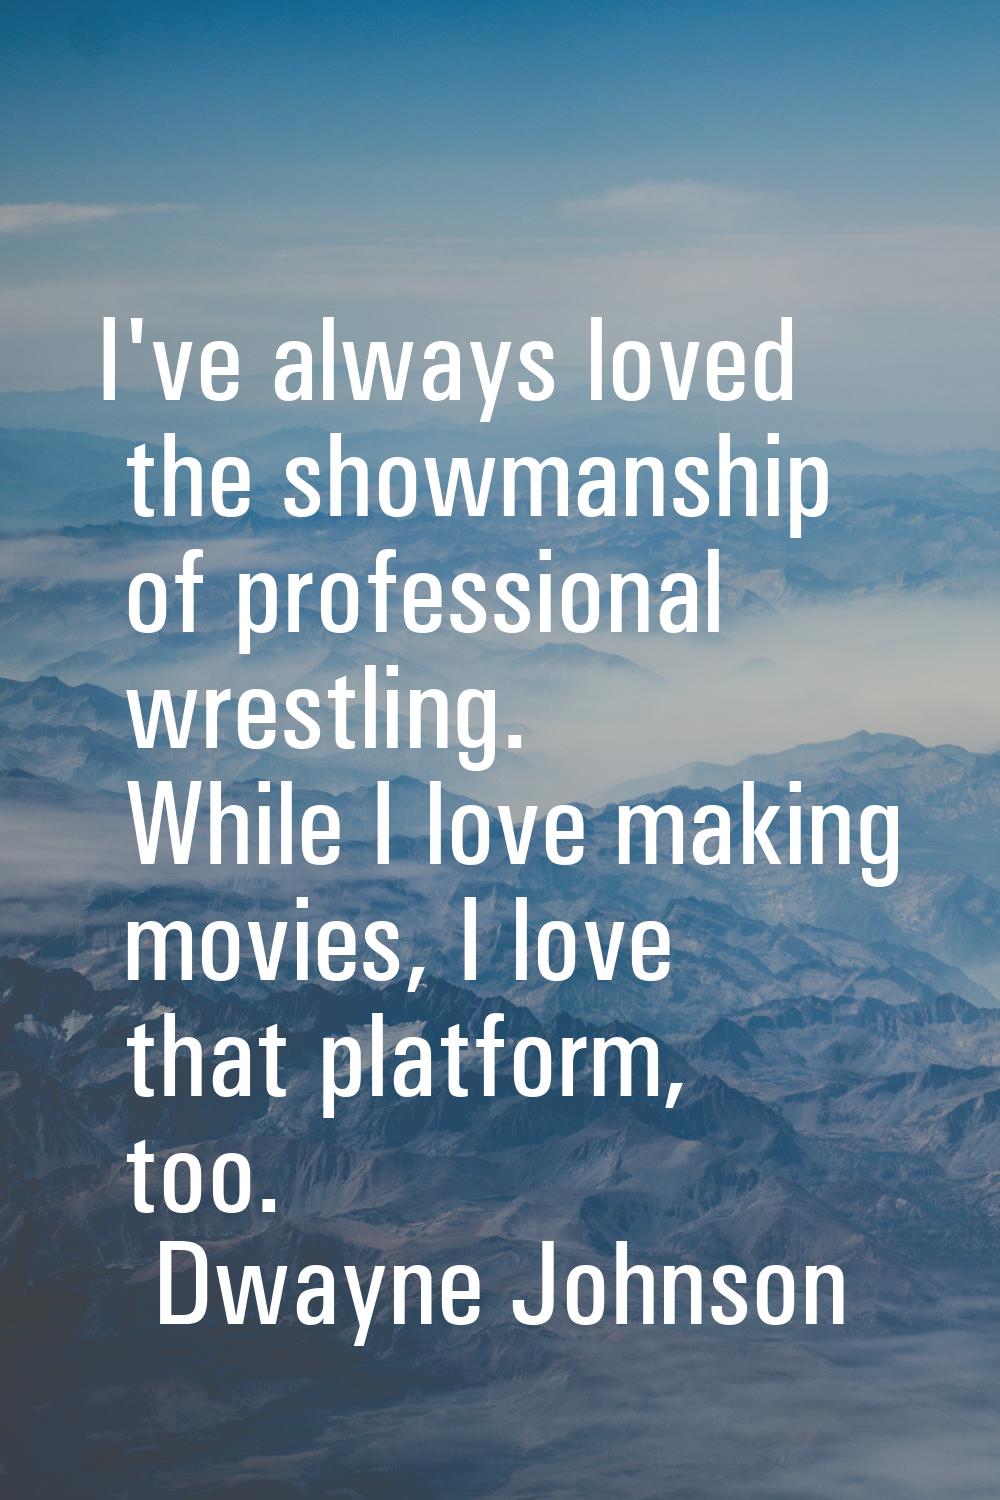 I've always loved the showmanship of professional wrestling. While I love making movies, I love tha